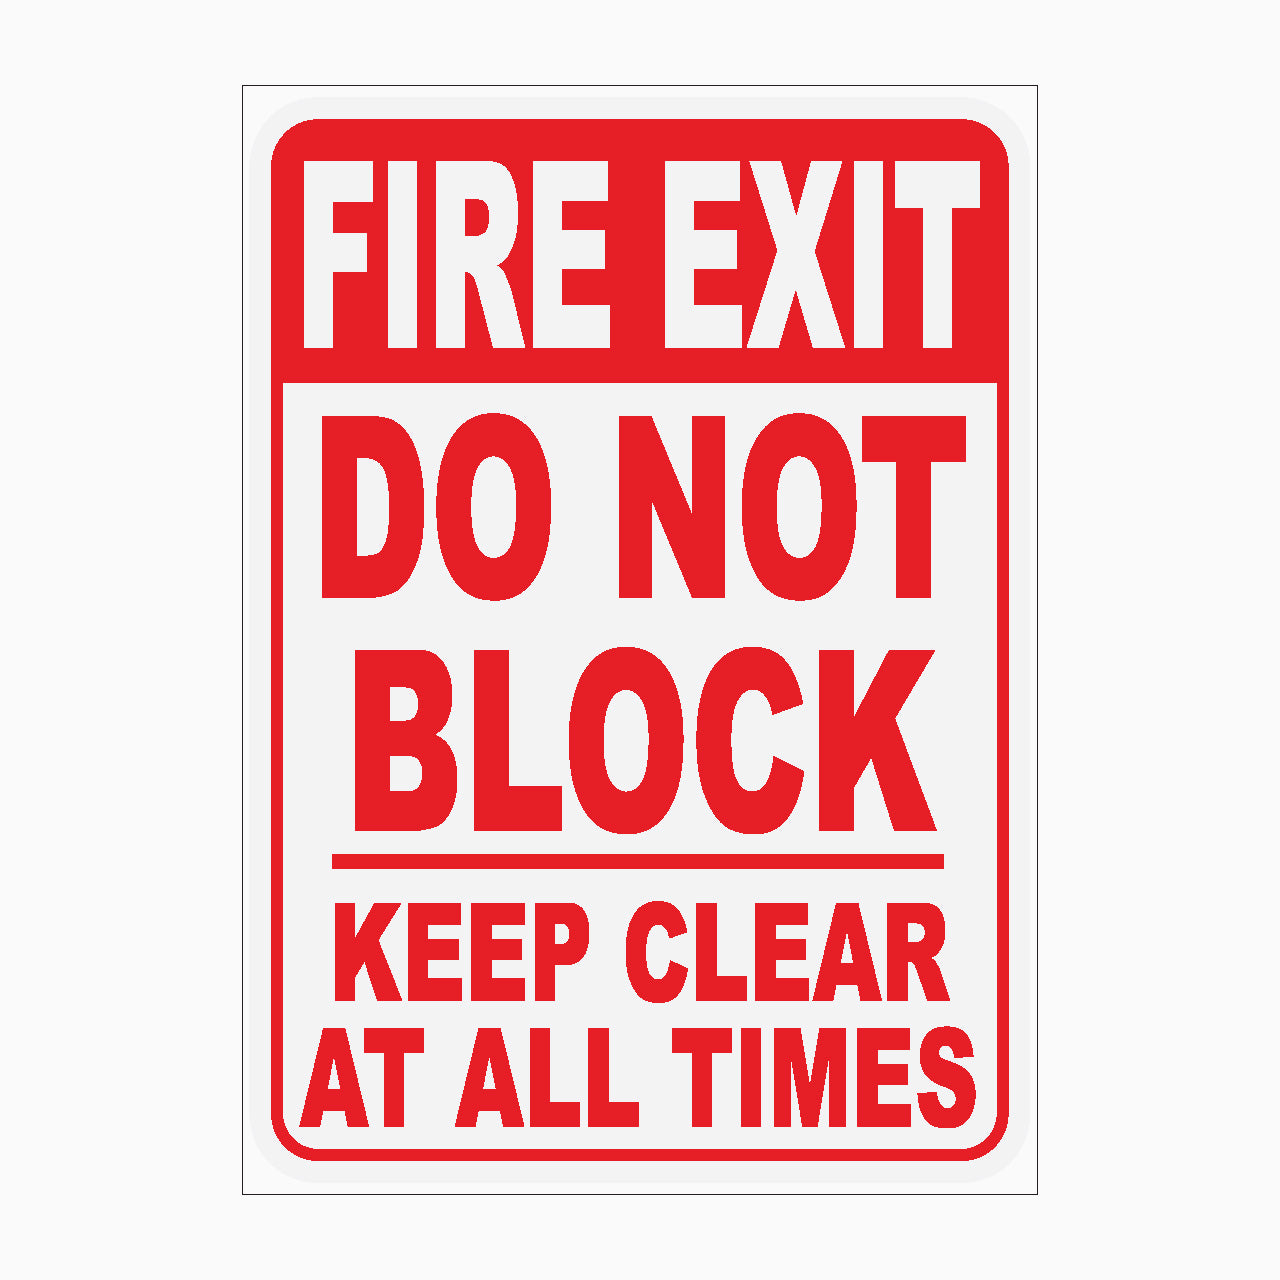 FIRE DOOR - DO NOT BLOCK - KEEP CLEAR AT ALL TIMES SIGN - FIRE SAFETY SIGNS - ONLINE SHOP - GET SIGNS